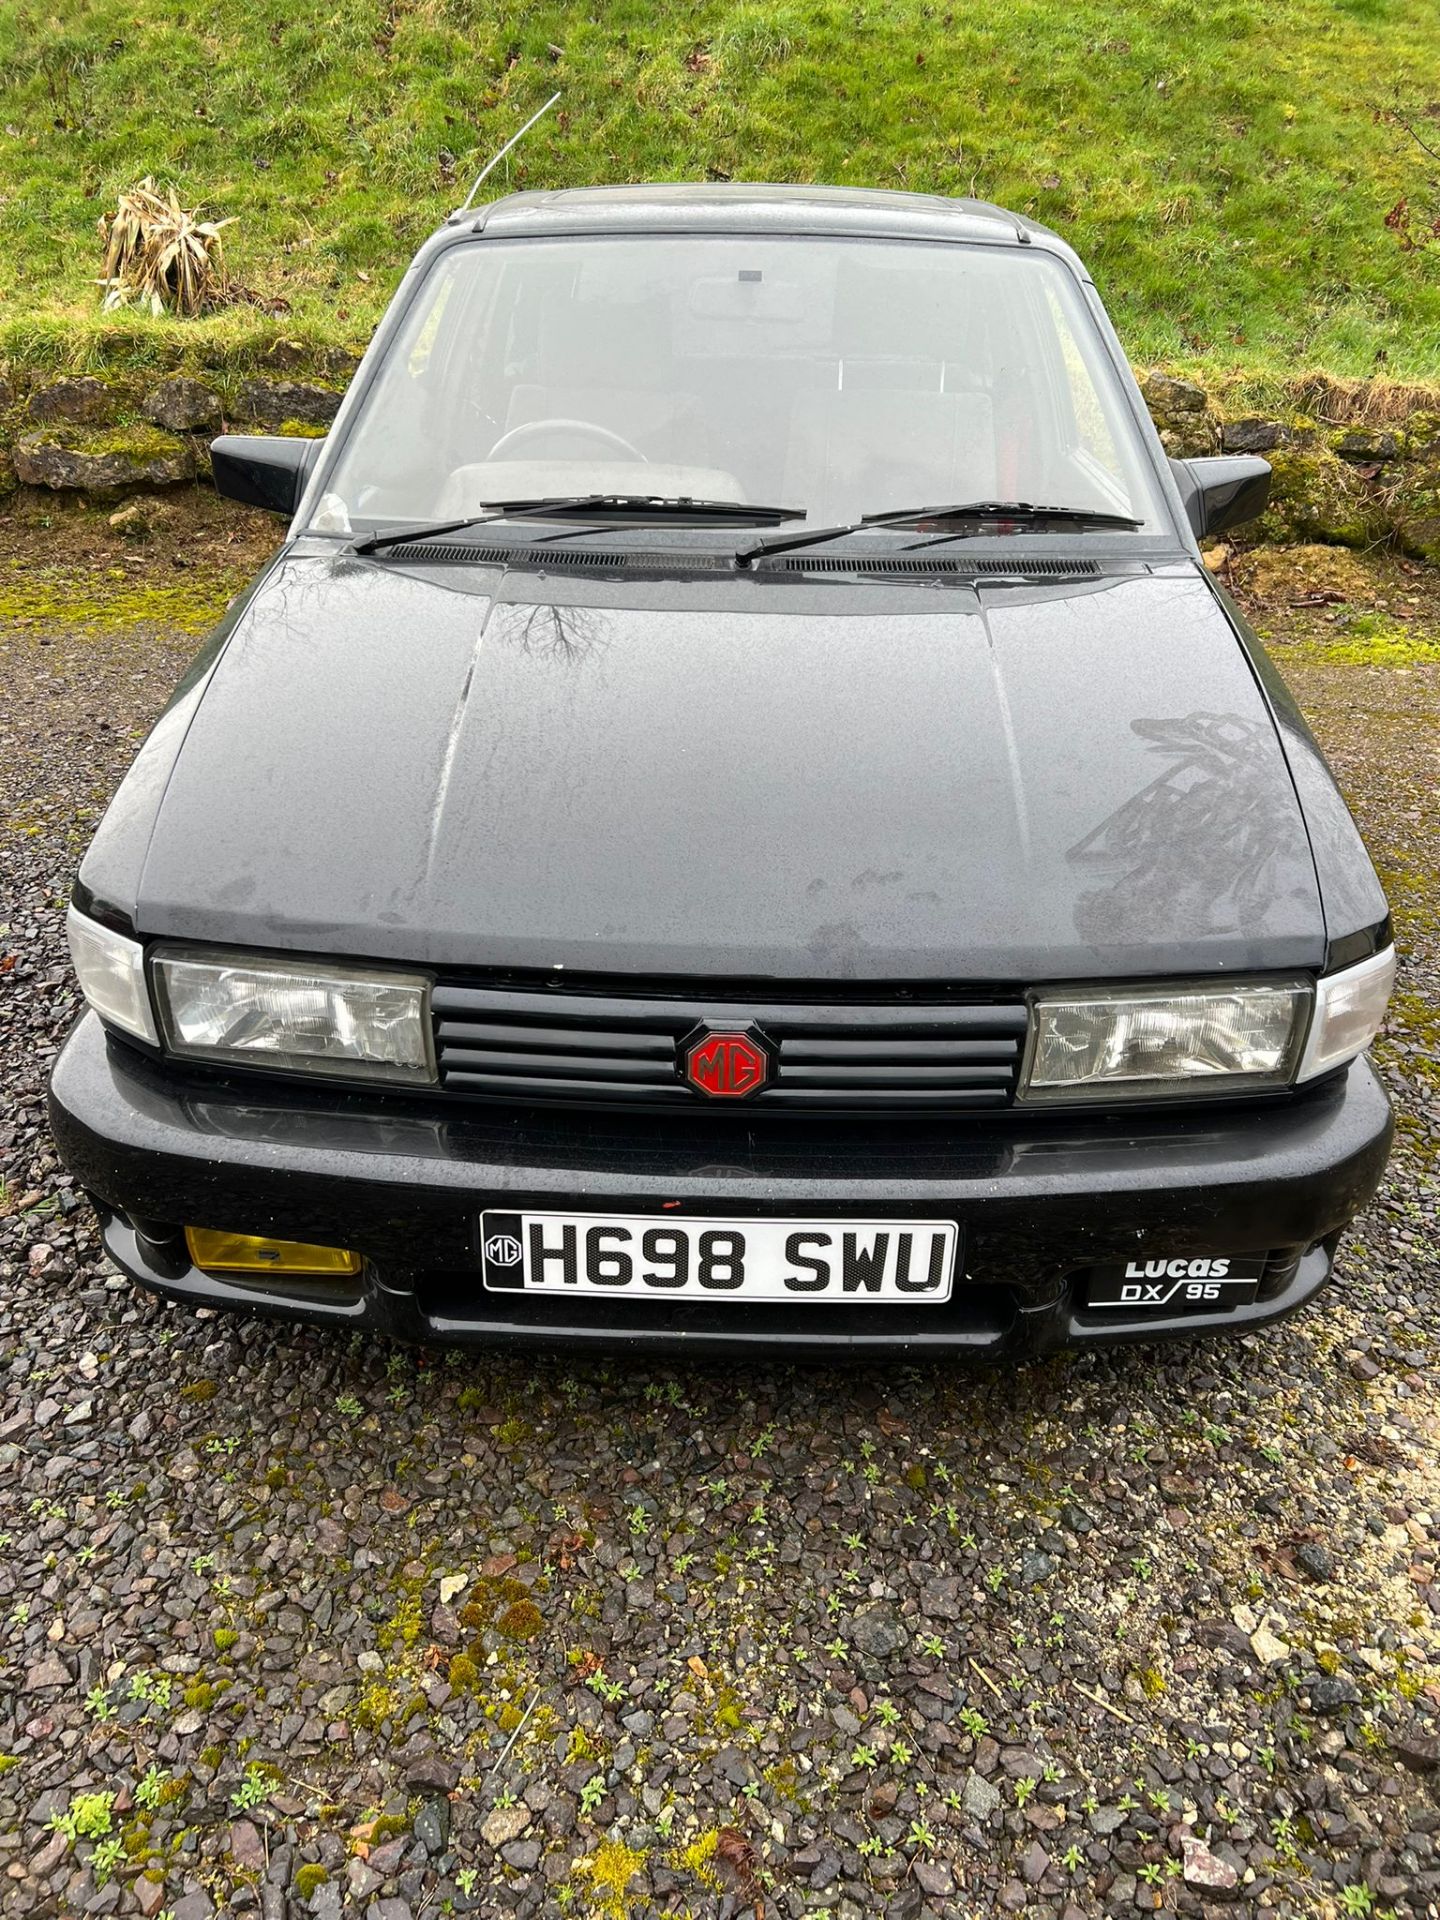 MG Bundle; MG Montego Turbo 1988, Rover MG Maestro Turbo 1990, and an MG Turbo engine and gearbox. - Image 22 of 30